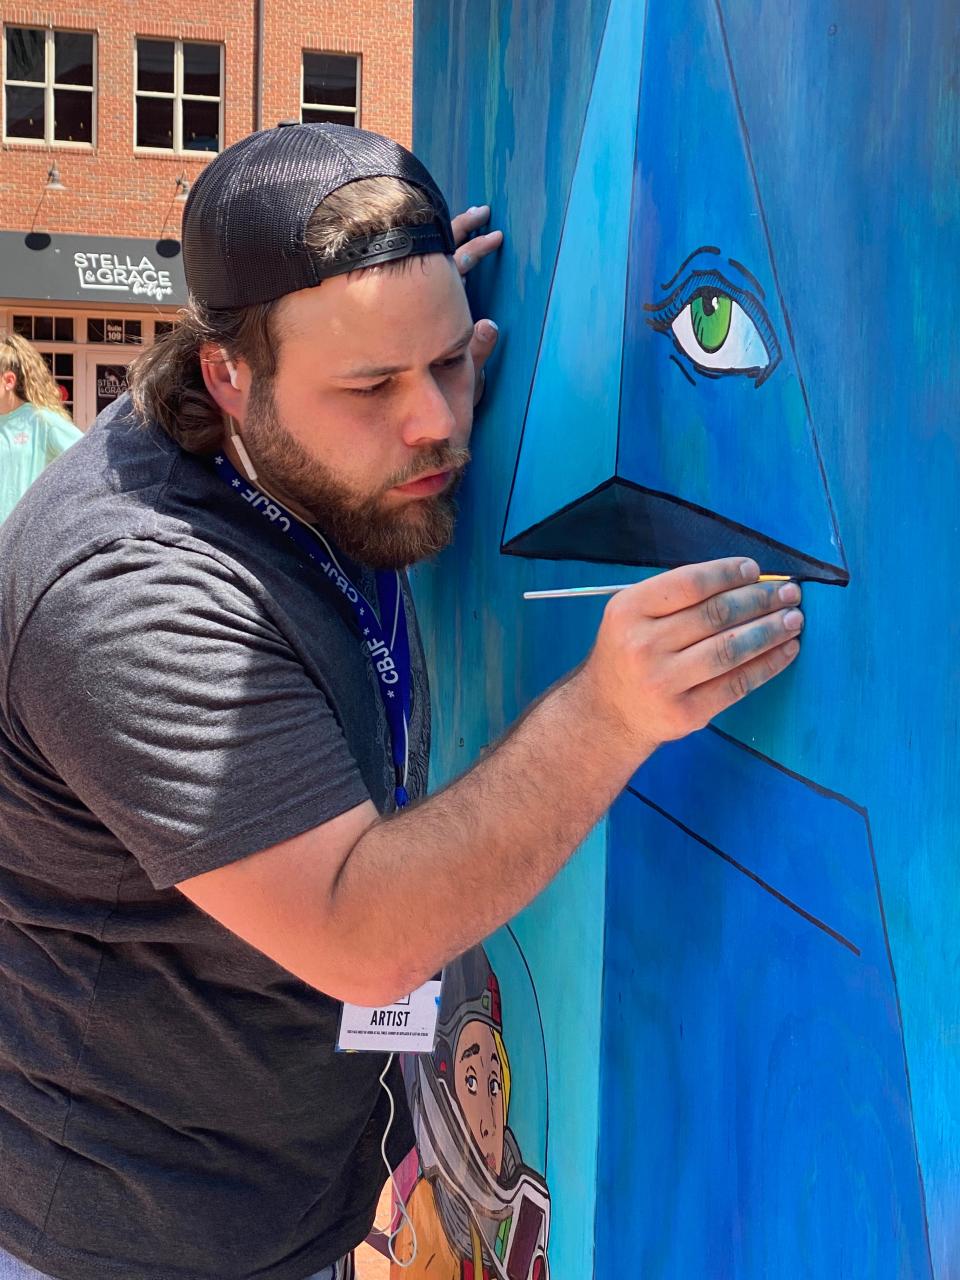 Columbus artist Joseph Dulin-Didonato works on a mini mural on Creekside Plaza that includes a reinterpretation of his daughter in the lower left corner. He said a comic book artist is one of his inspirations.